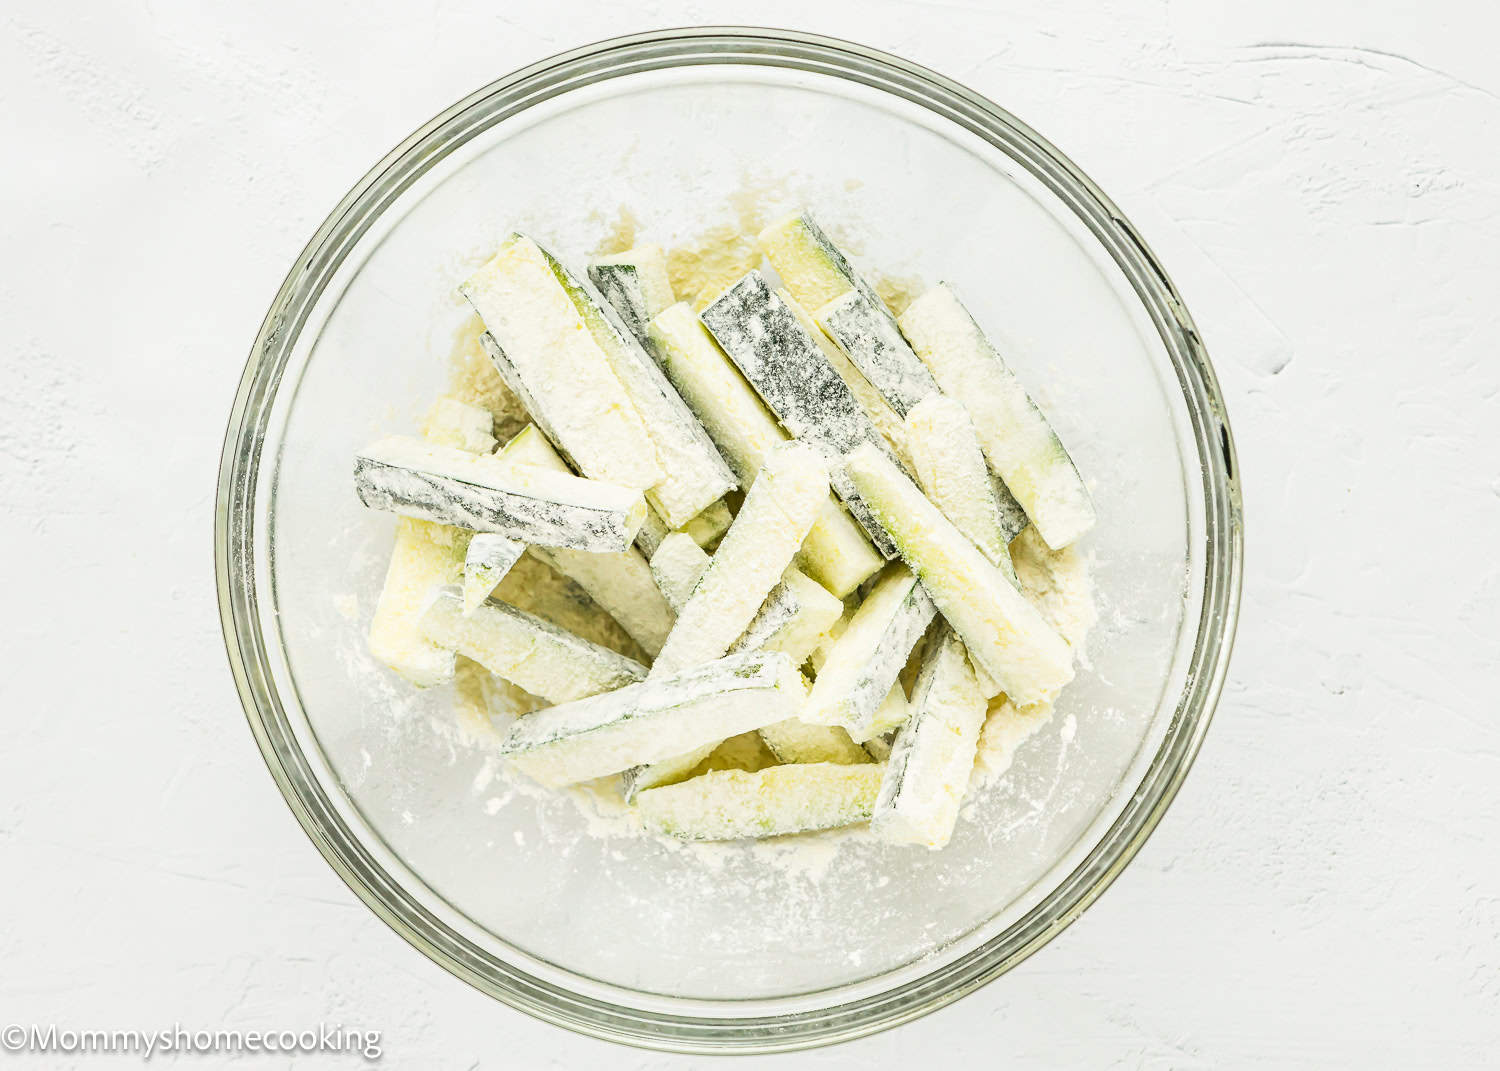 Zucchini sticks to make Eggless Zucchini Fries in a bowl with flour.